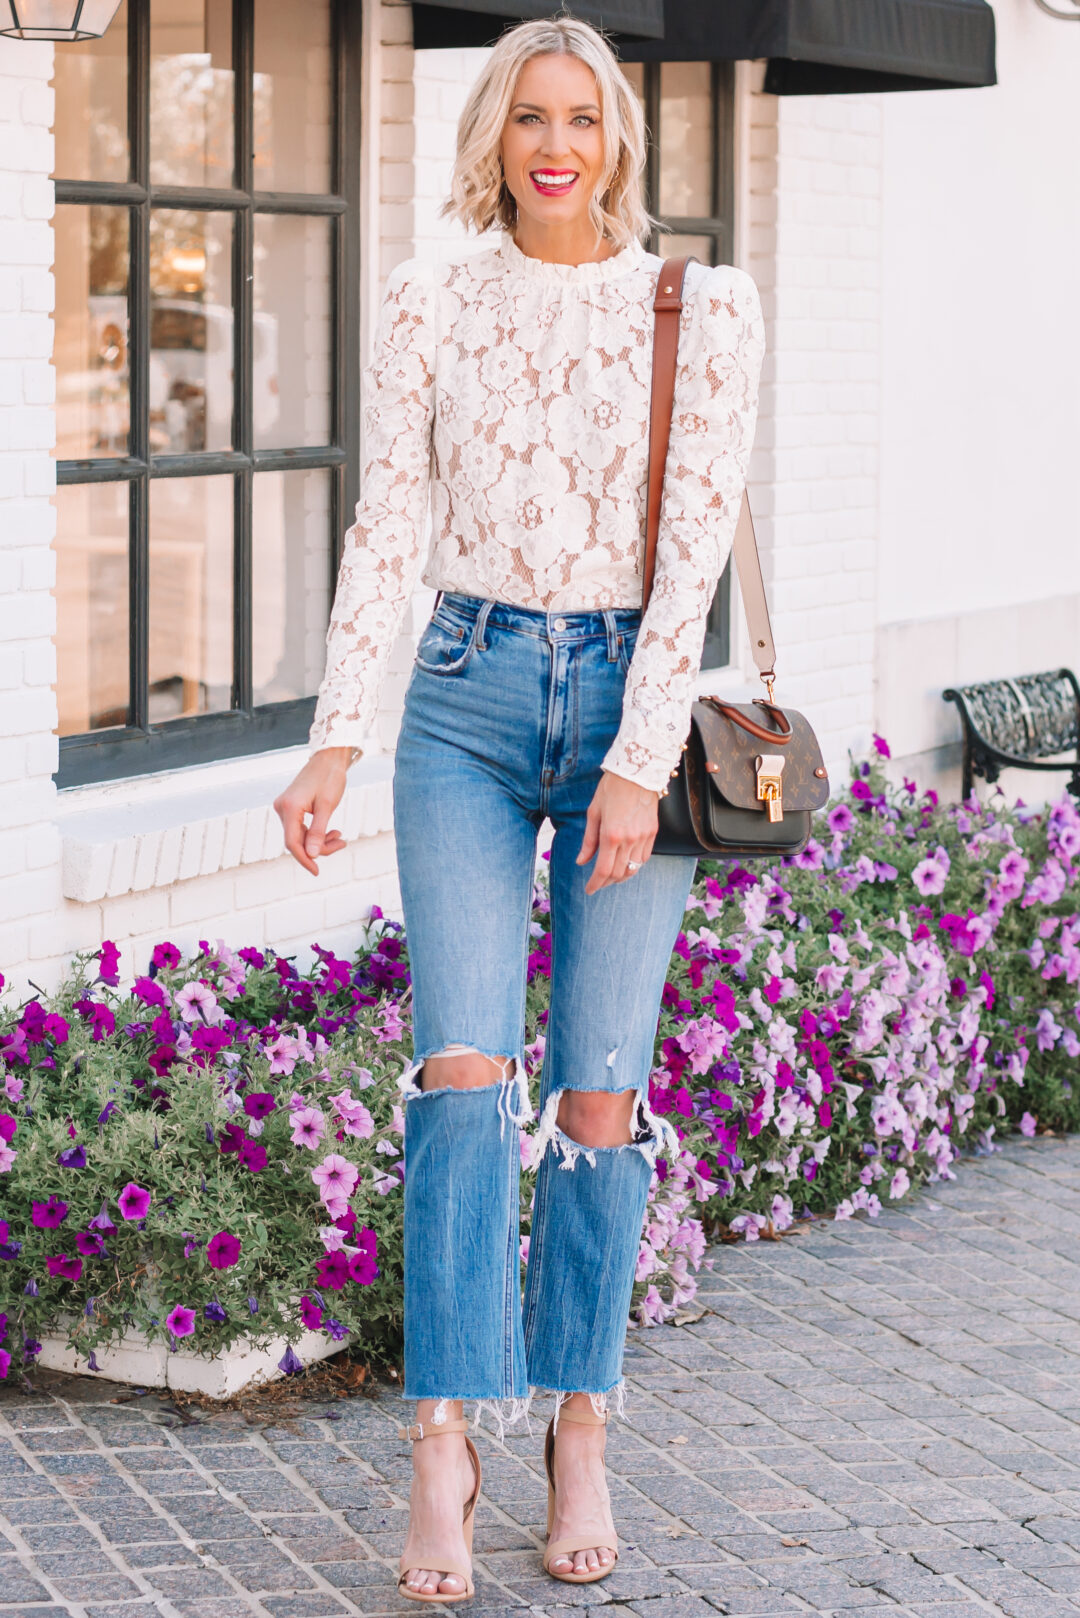 Gorgeous White Lace Blouse - Straight A Style